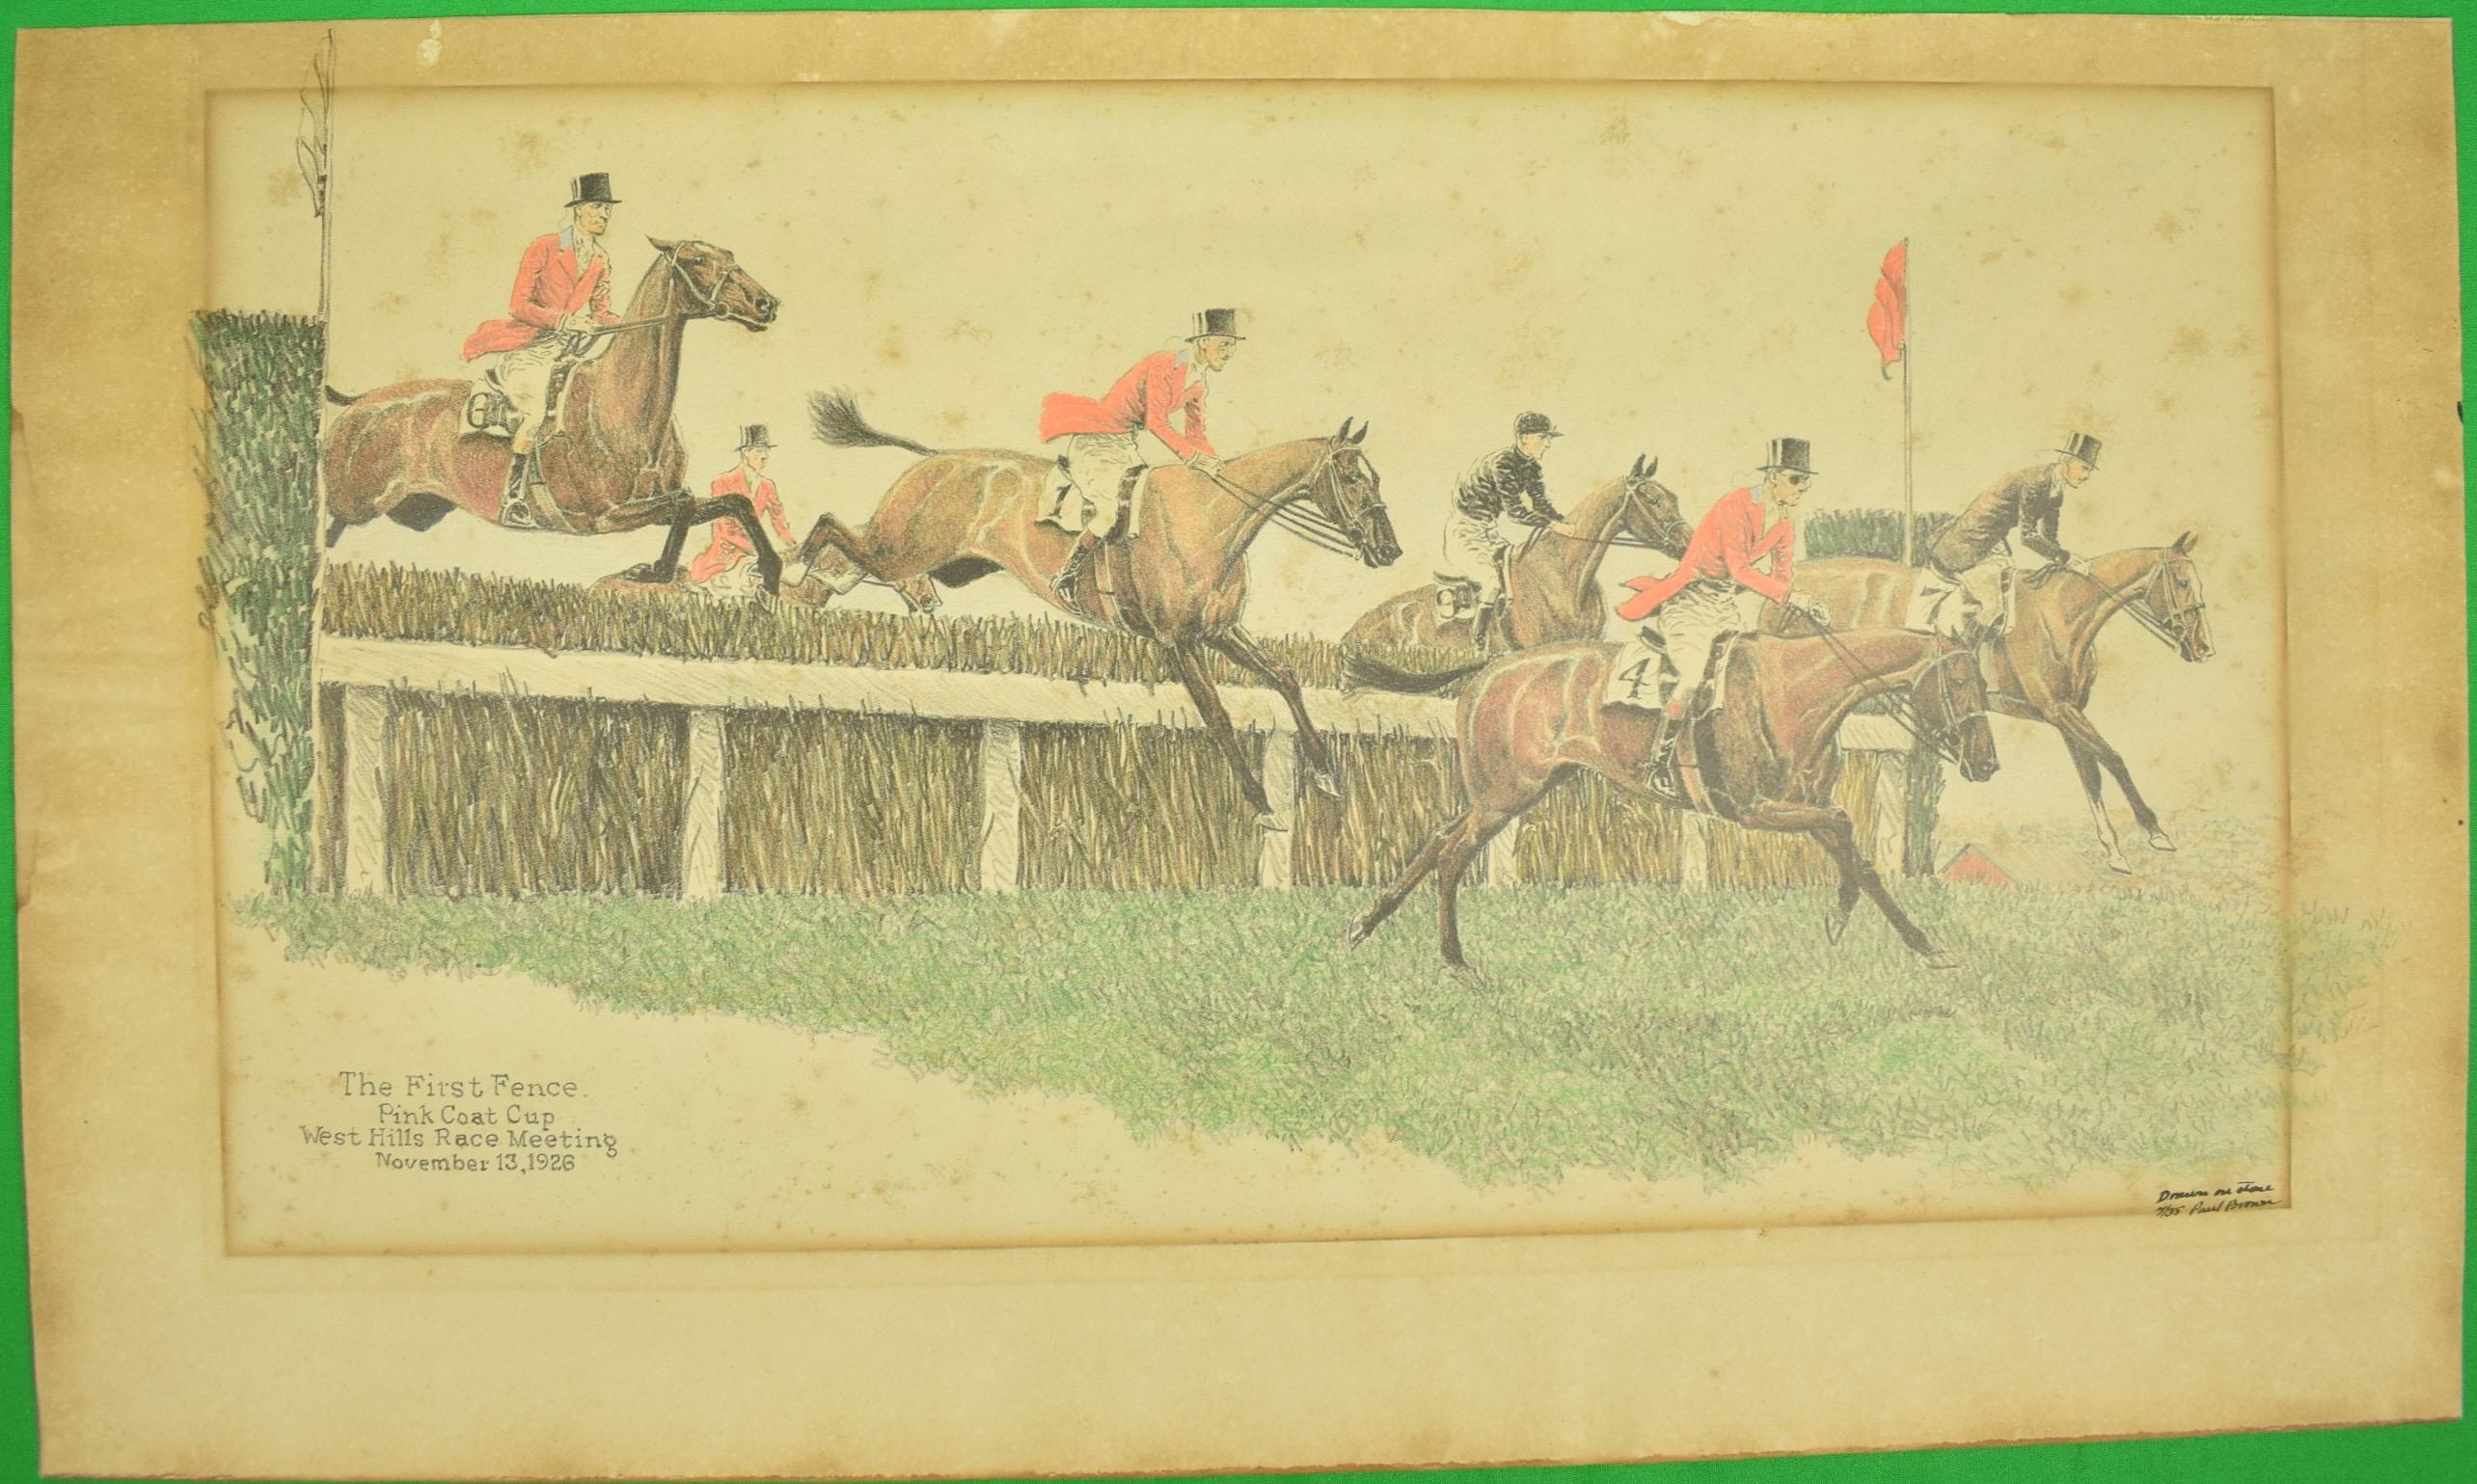 "Paul Brown 'The First Fence Pink Coat Cup' West Hills, L.I. Race Meeting" 1926